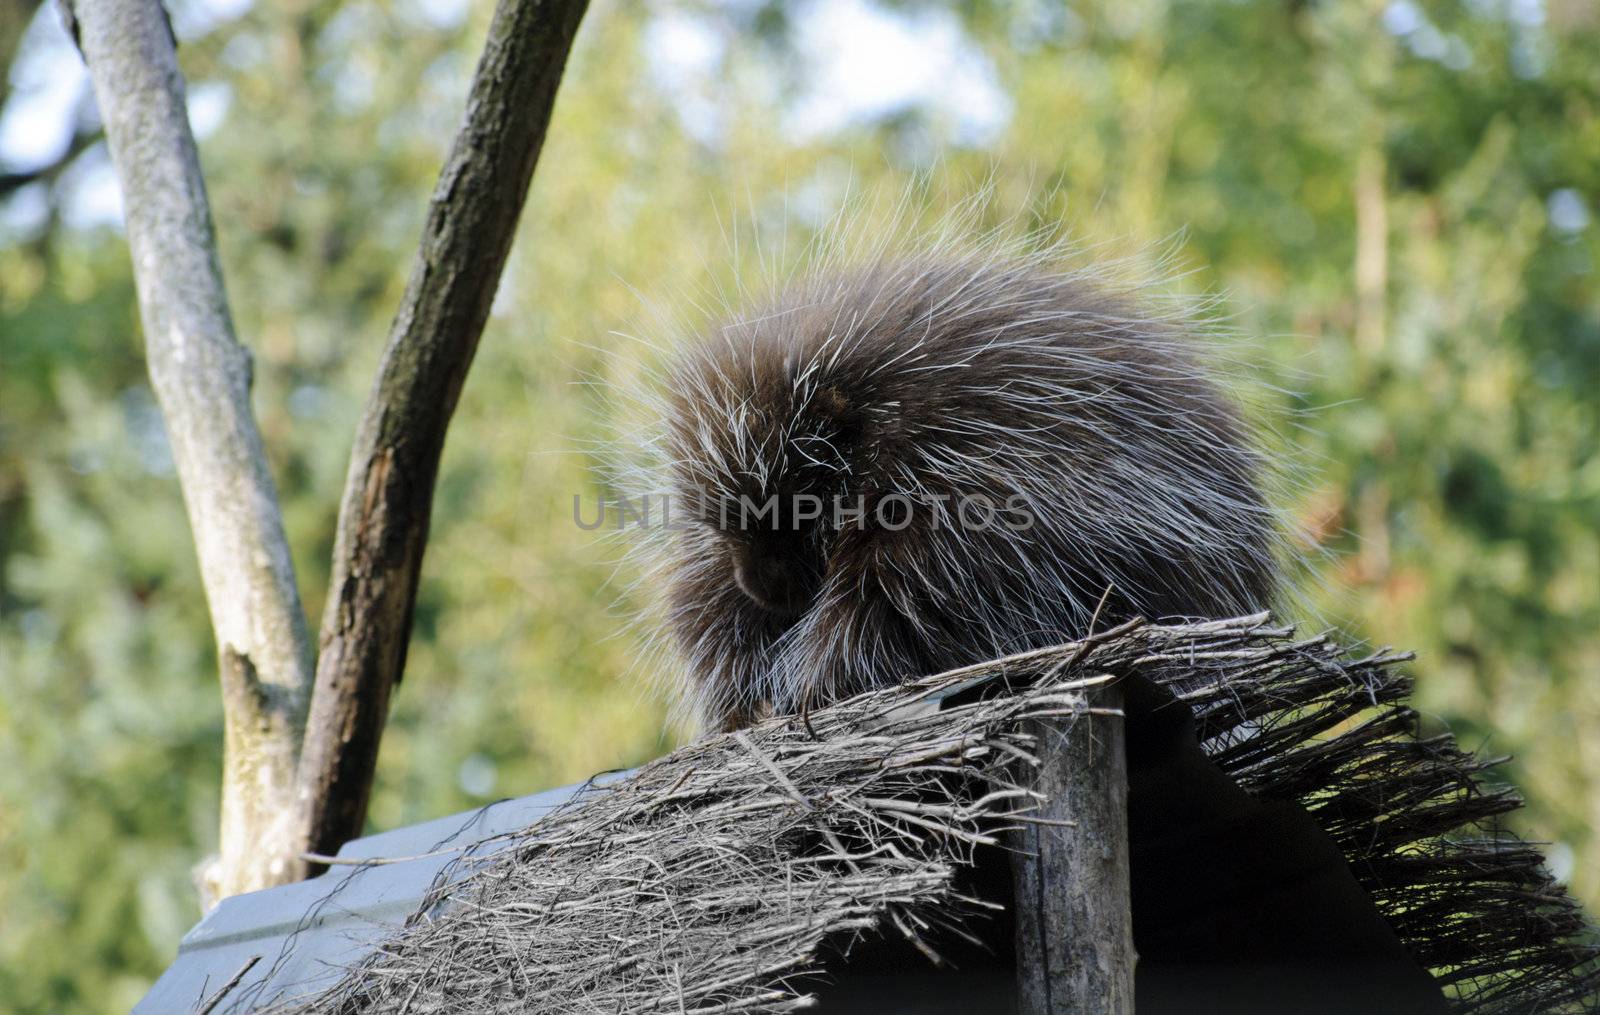 New World porcupine, or ethizontidae, sleeping in the forest